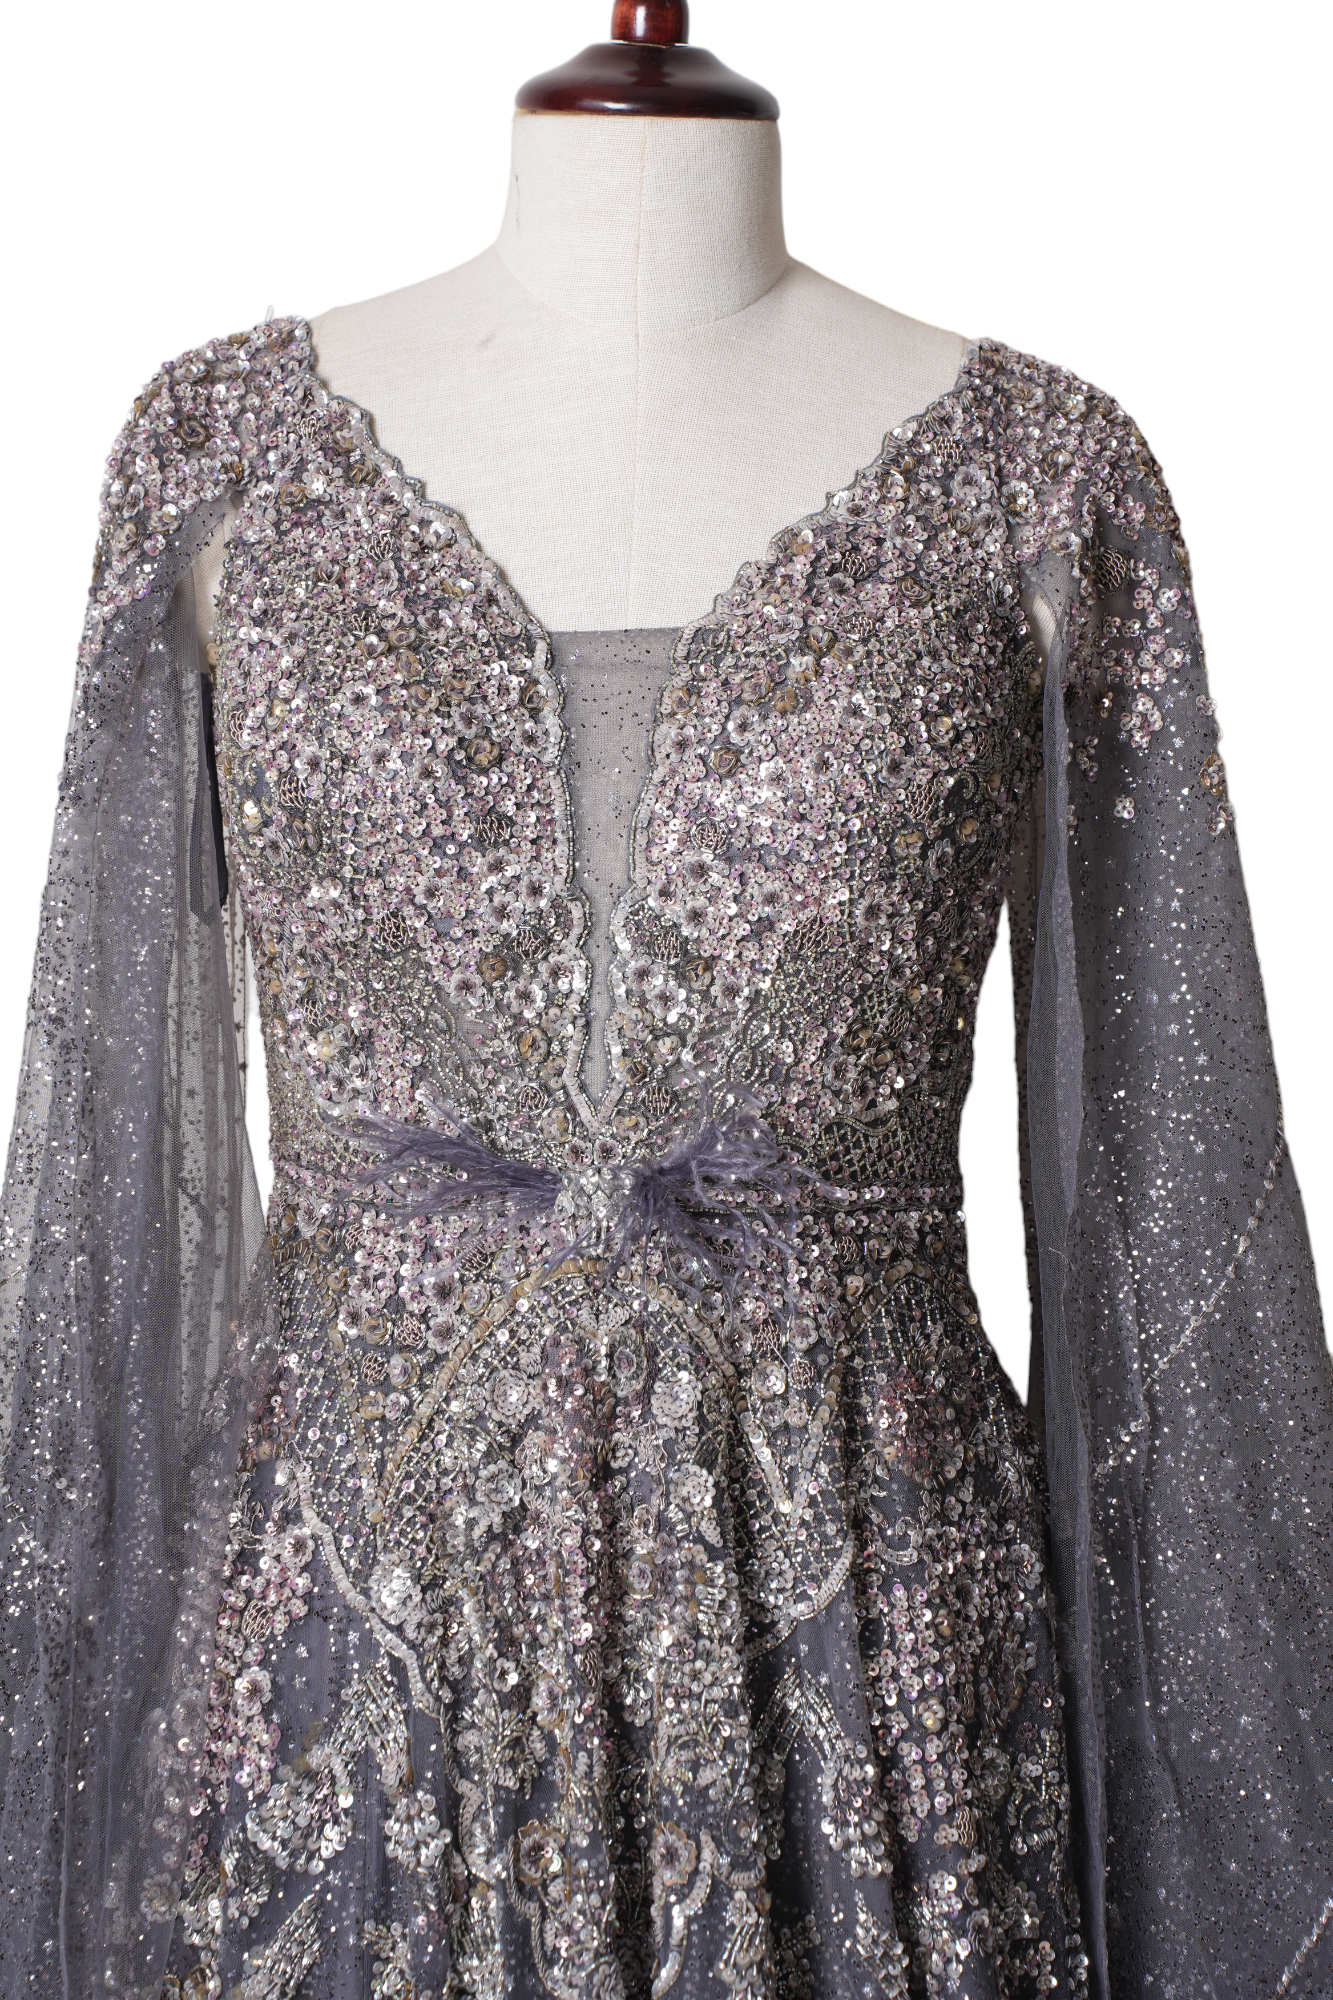 Dolly J Grey Embellished Cape Sleeve Gown